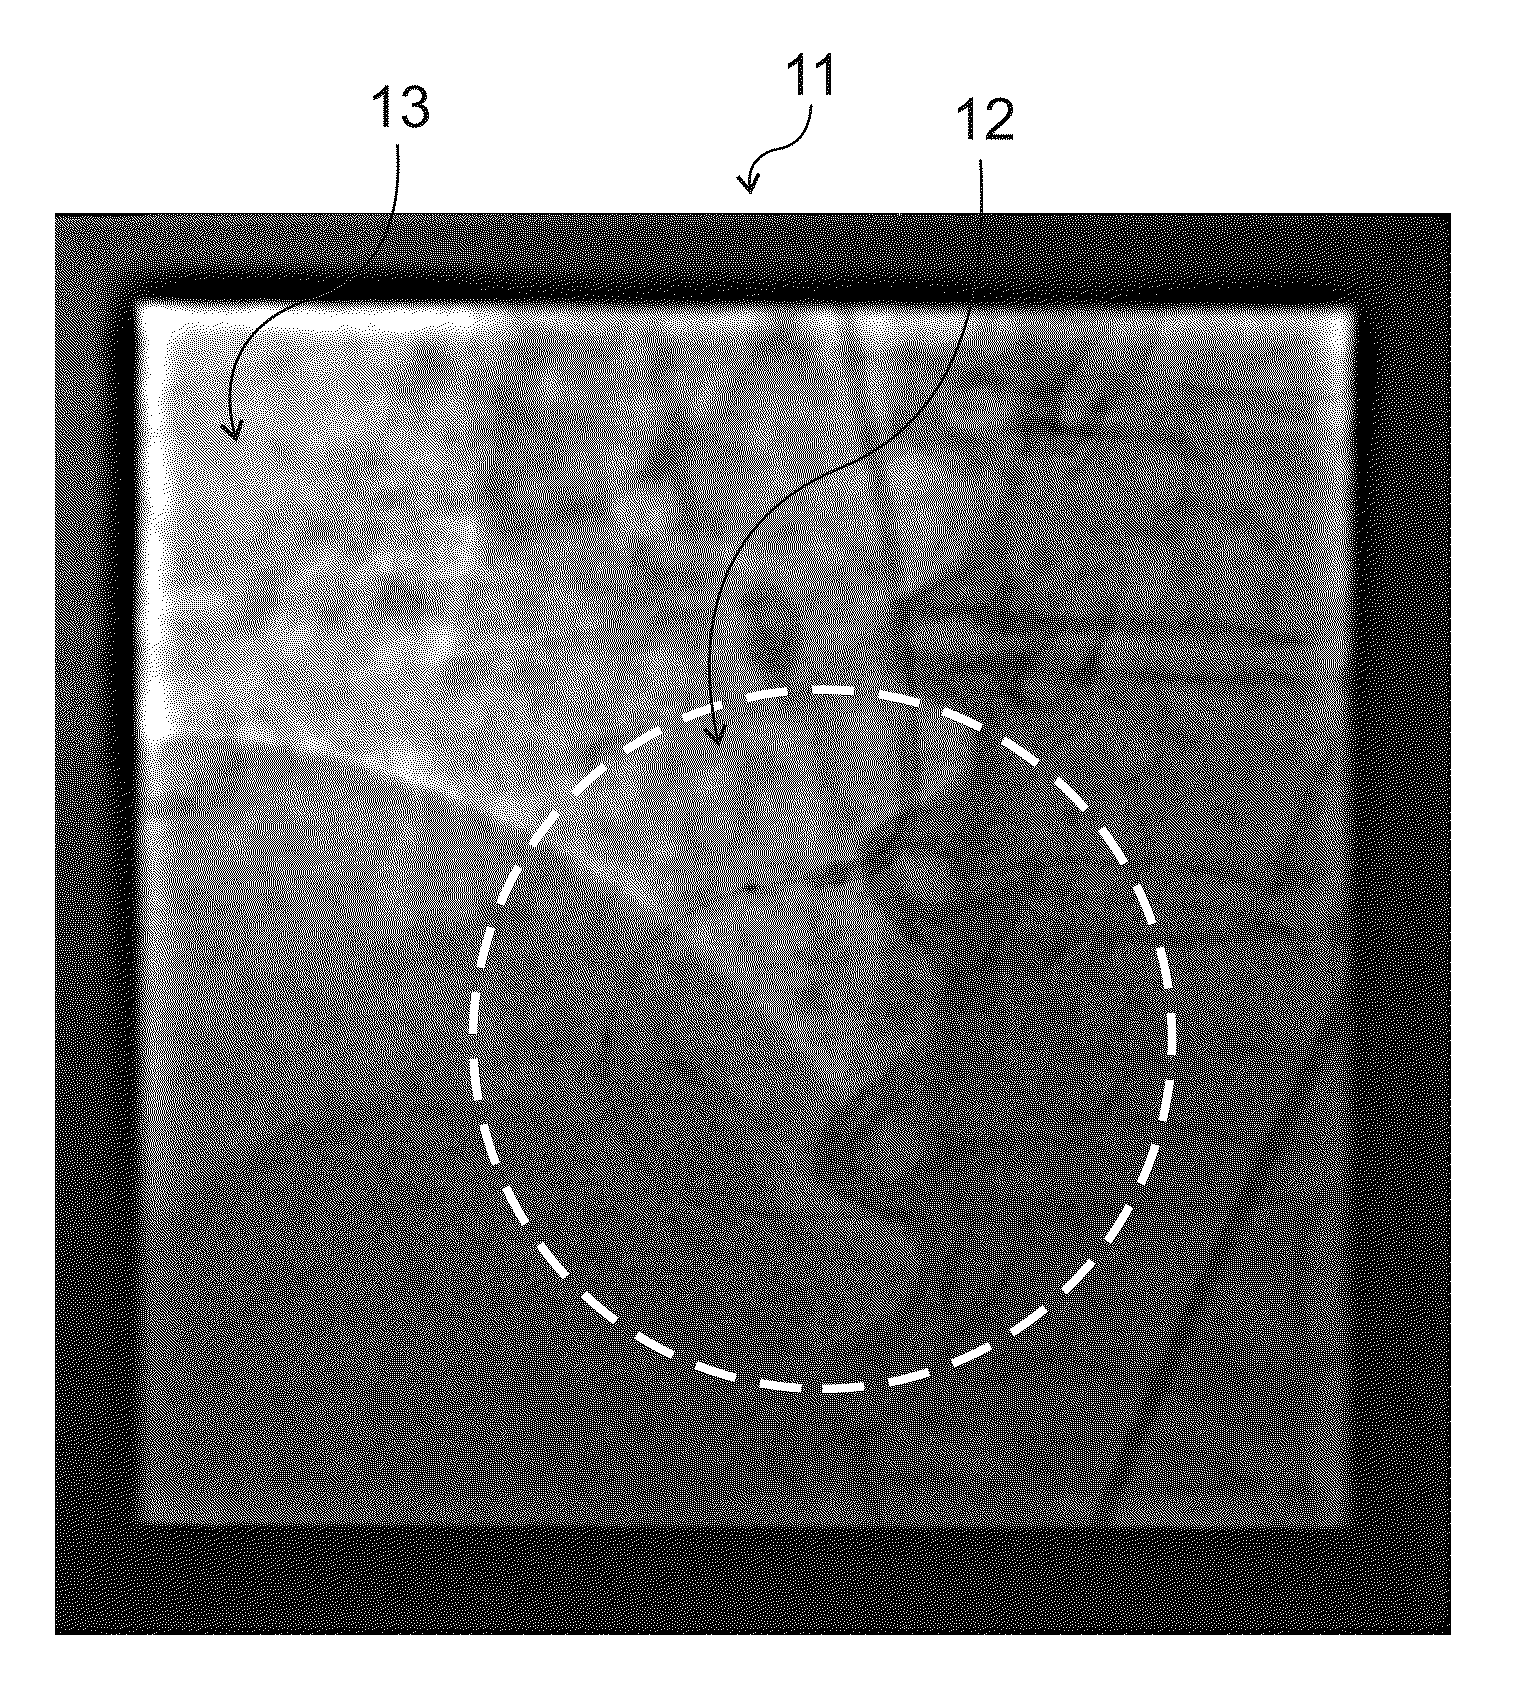 Method, system and computer readable medium for processing a medical video image